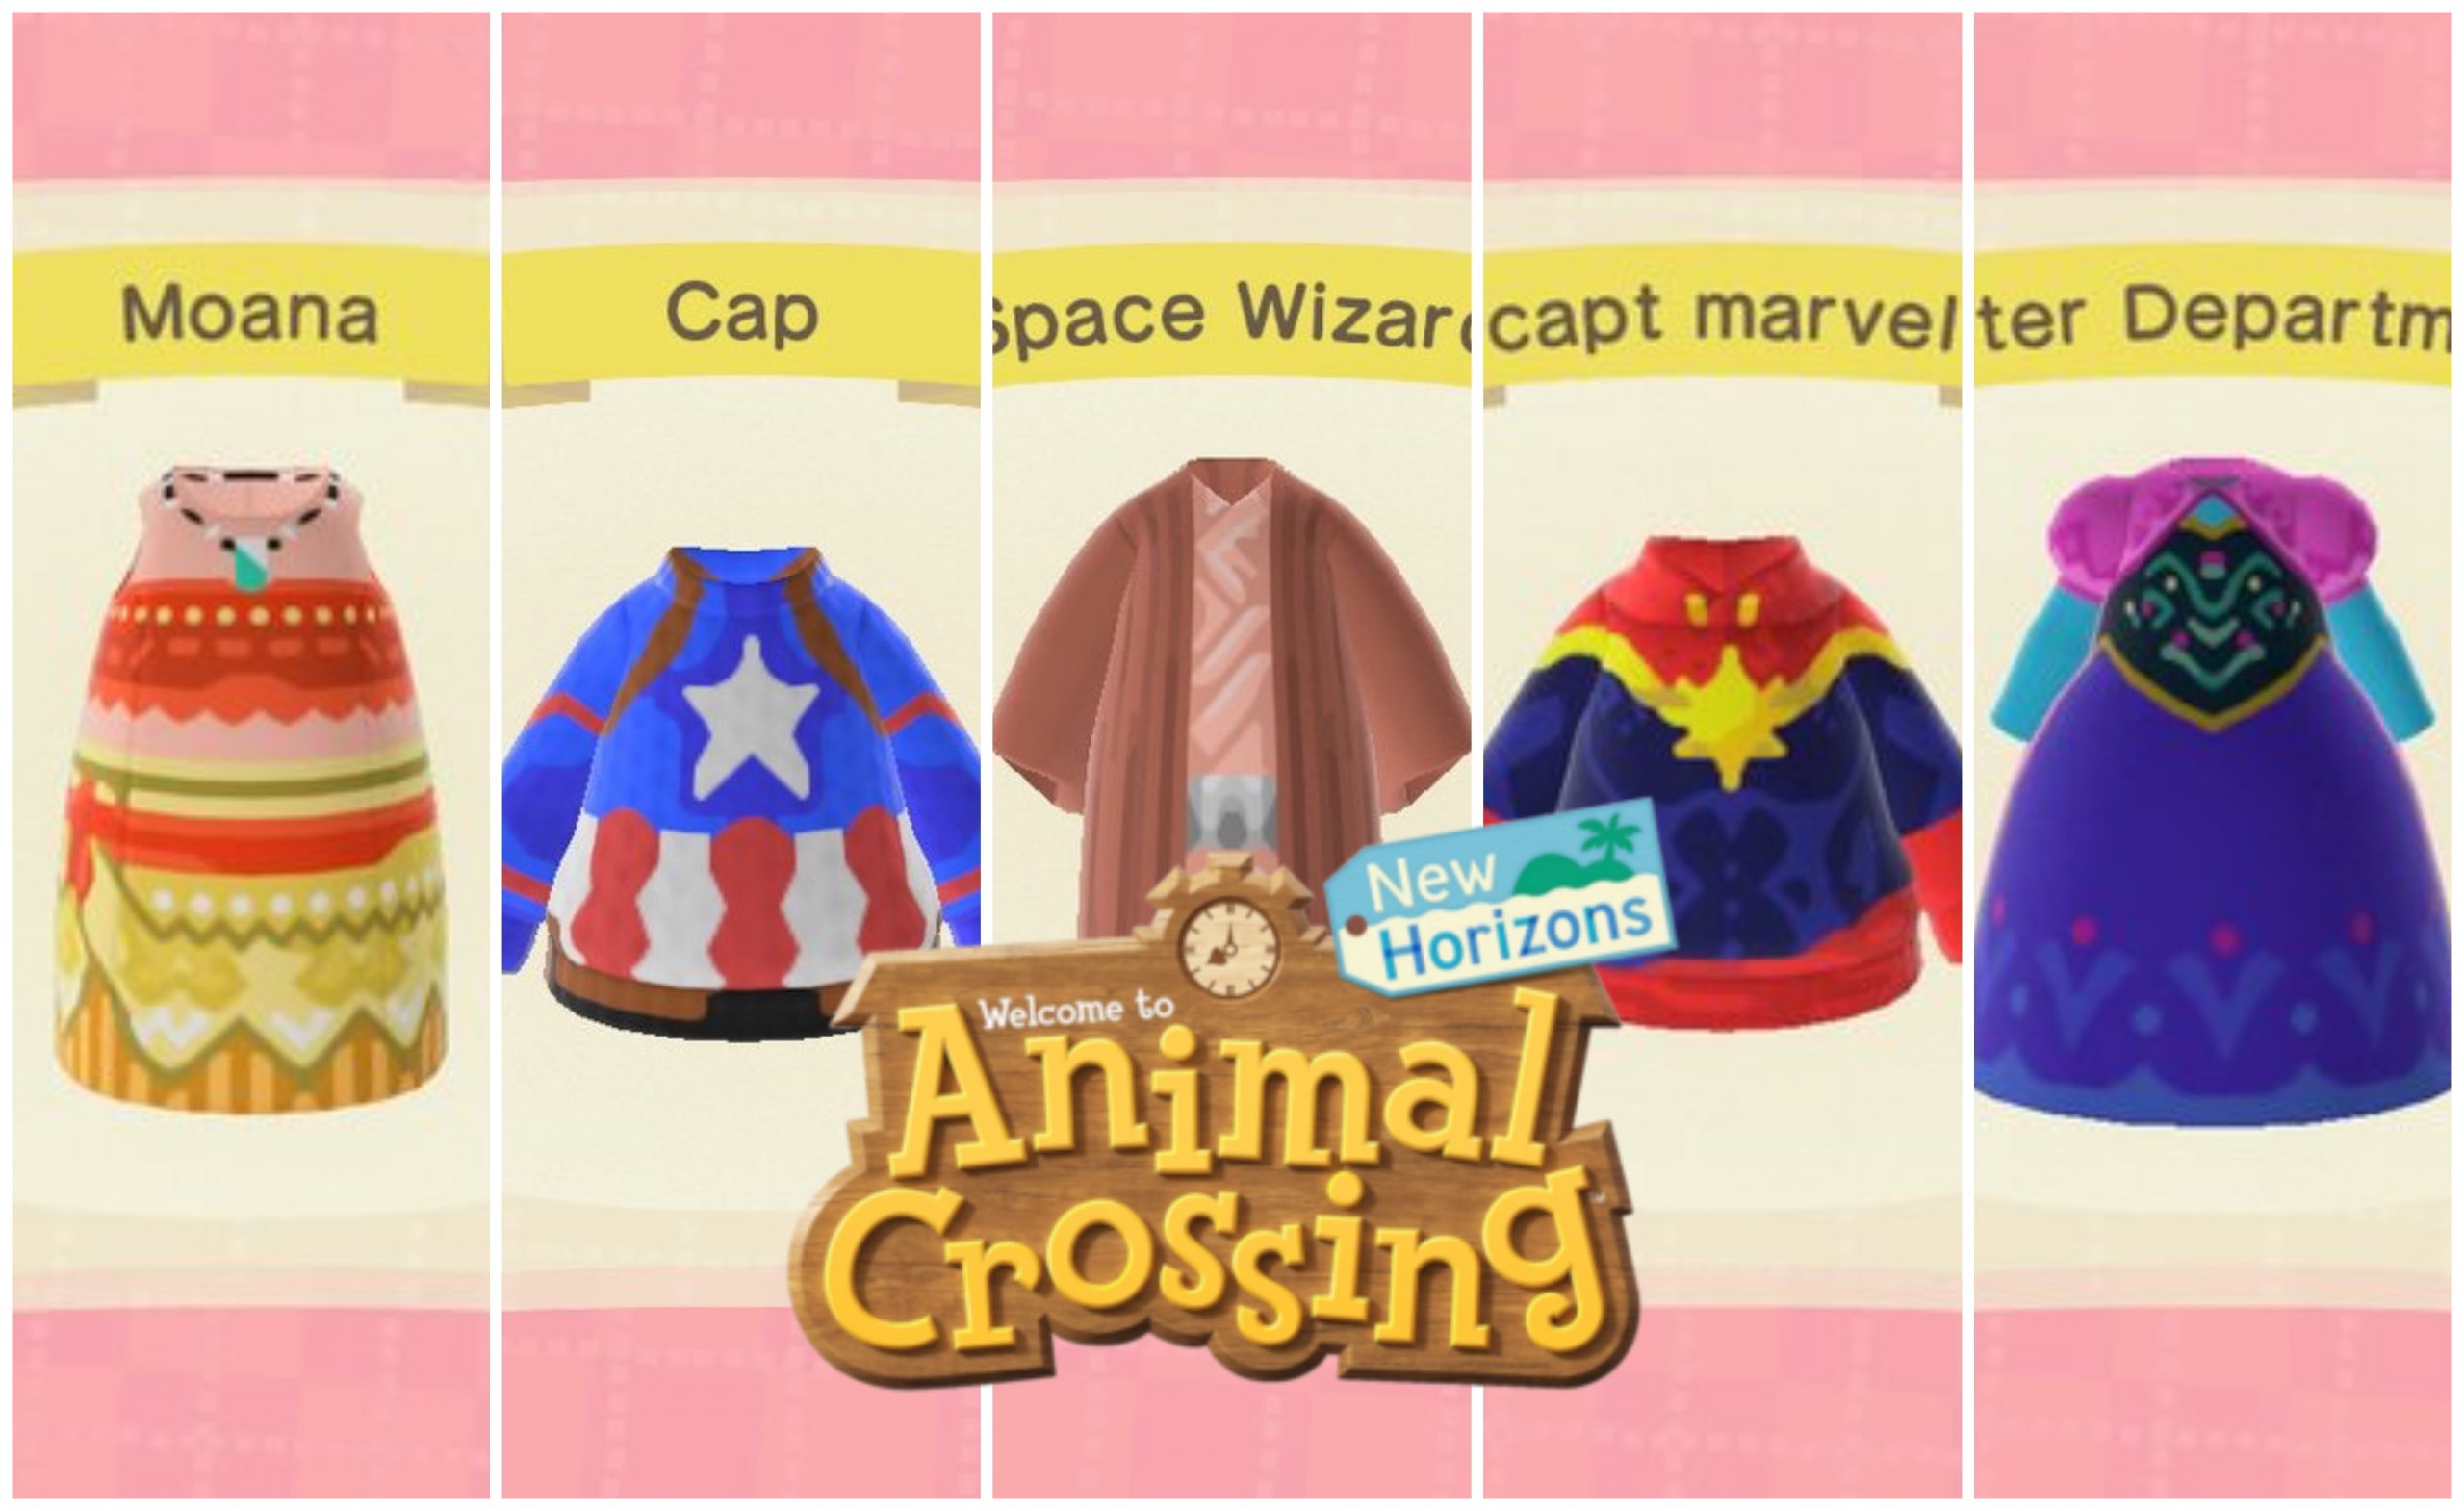 New Star Wars, Marvel and Disney Inspired Outfits Available for Animal Crossing: New Horizons